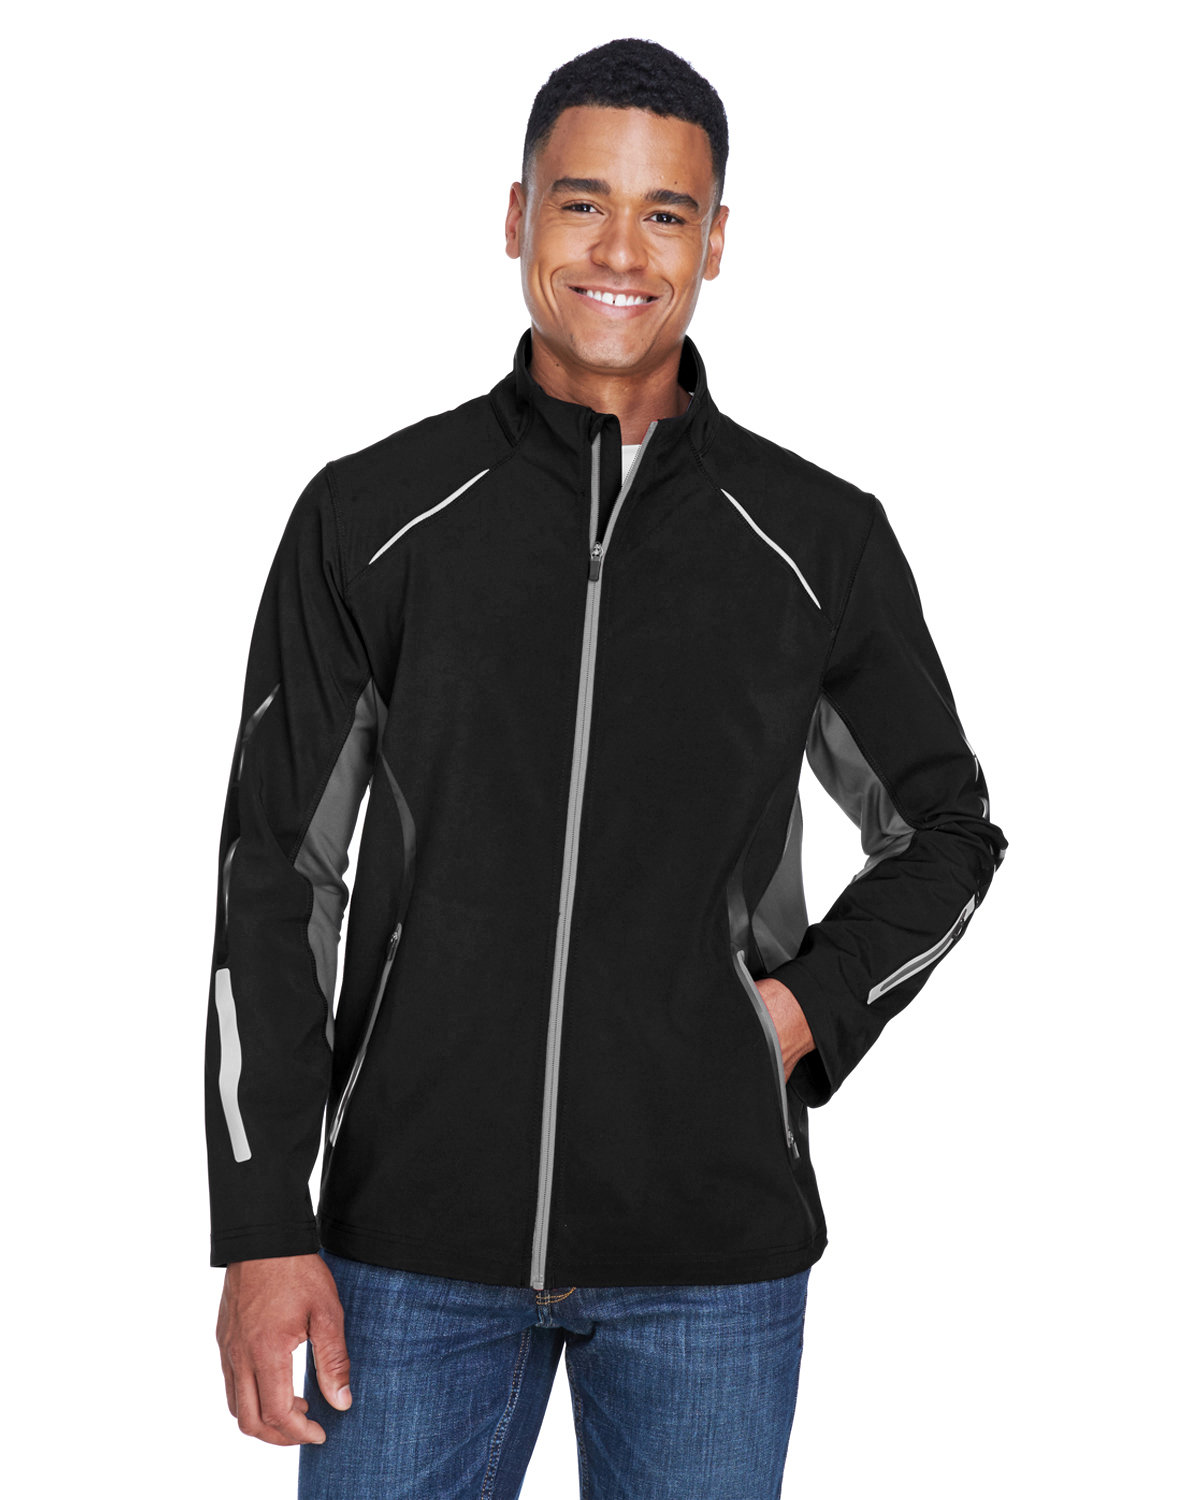 North End Men's Pursuit Three-Layer Light Bonded Hybrid Soft Shell Jacket with Laser Perforation BLACK 